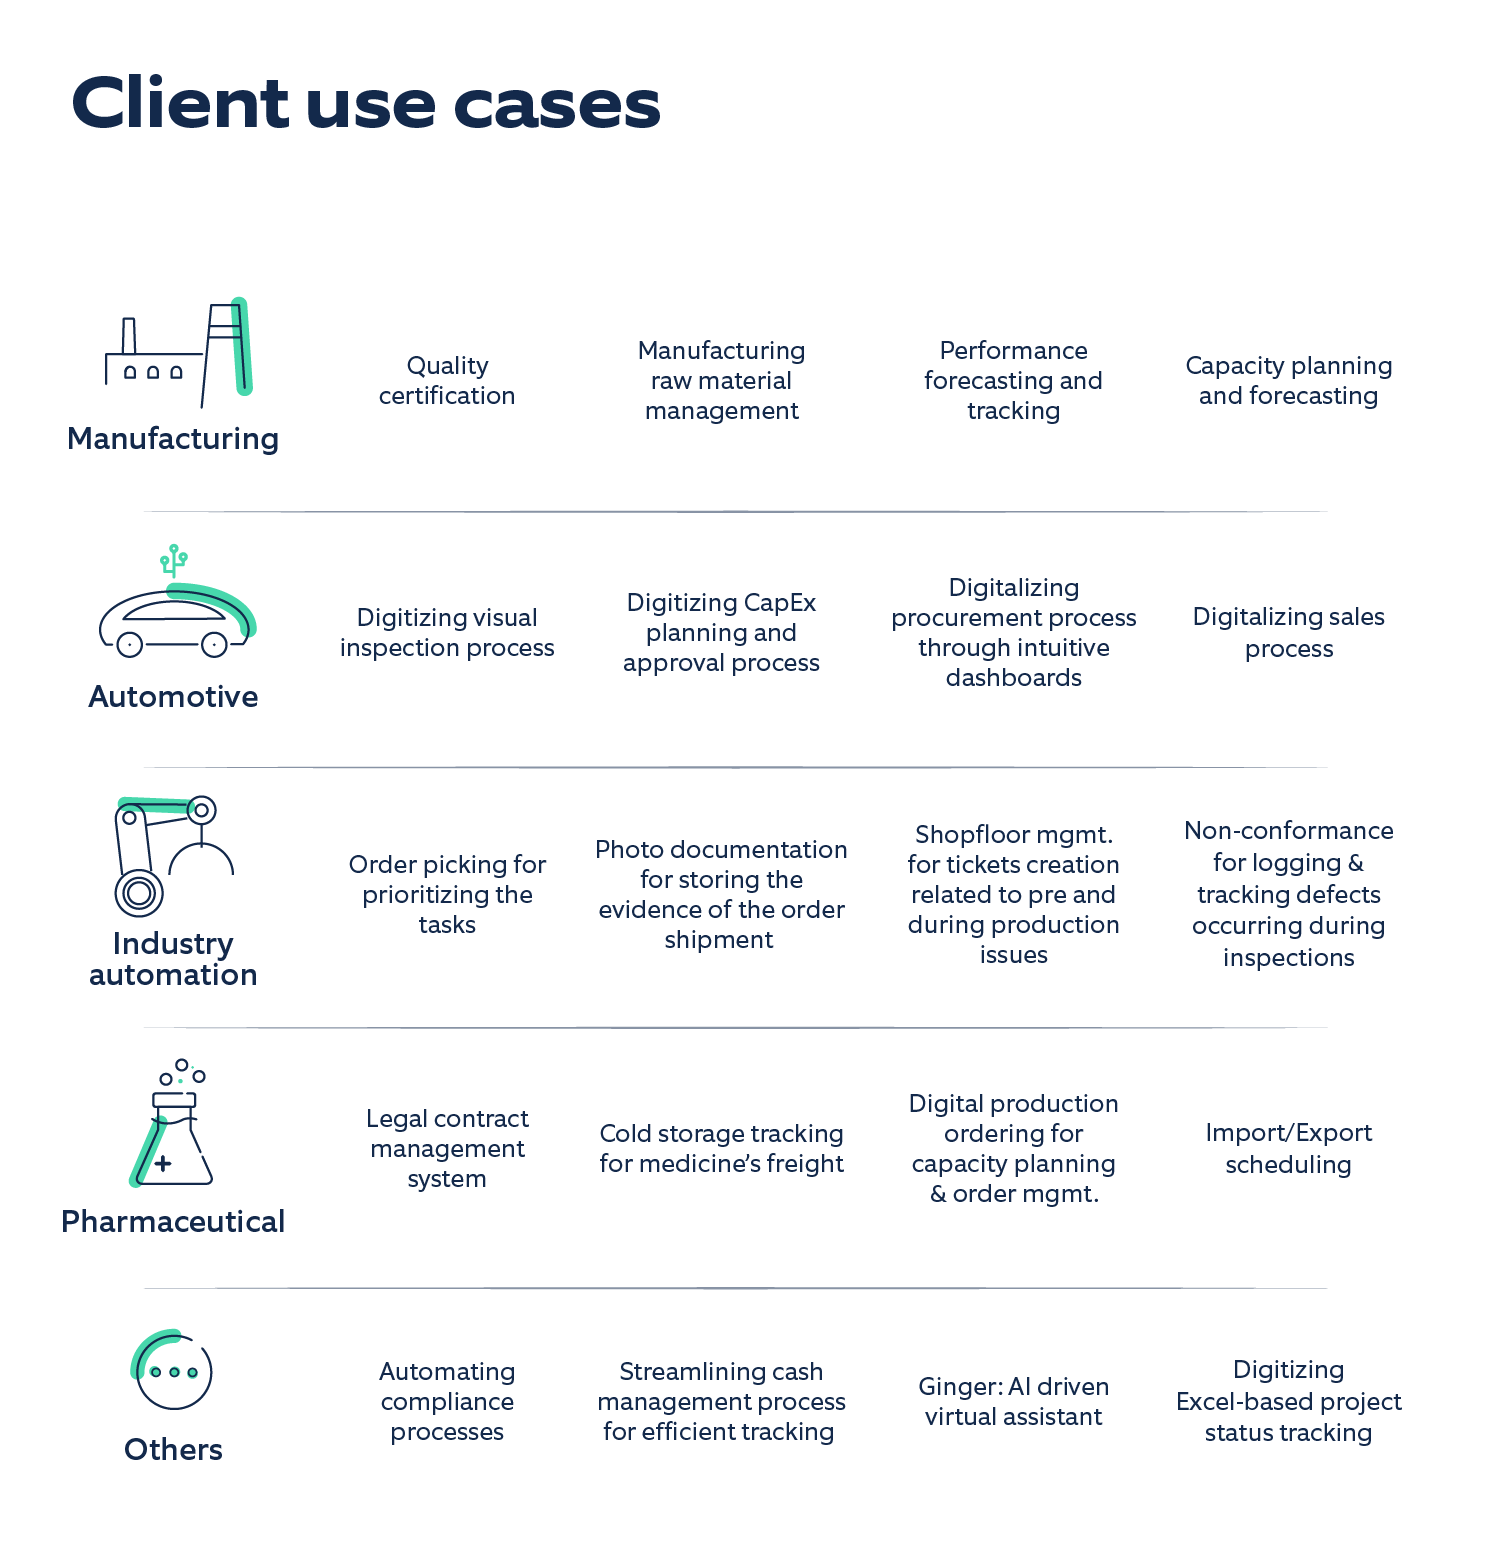 Client use cases